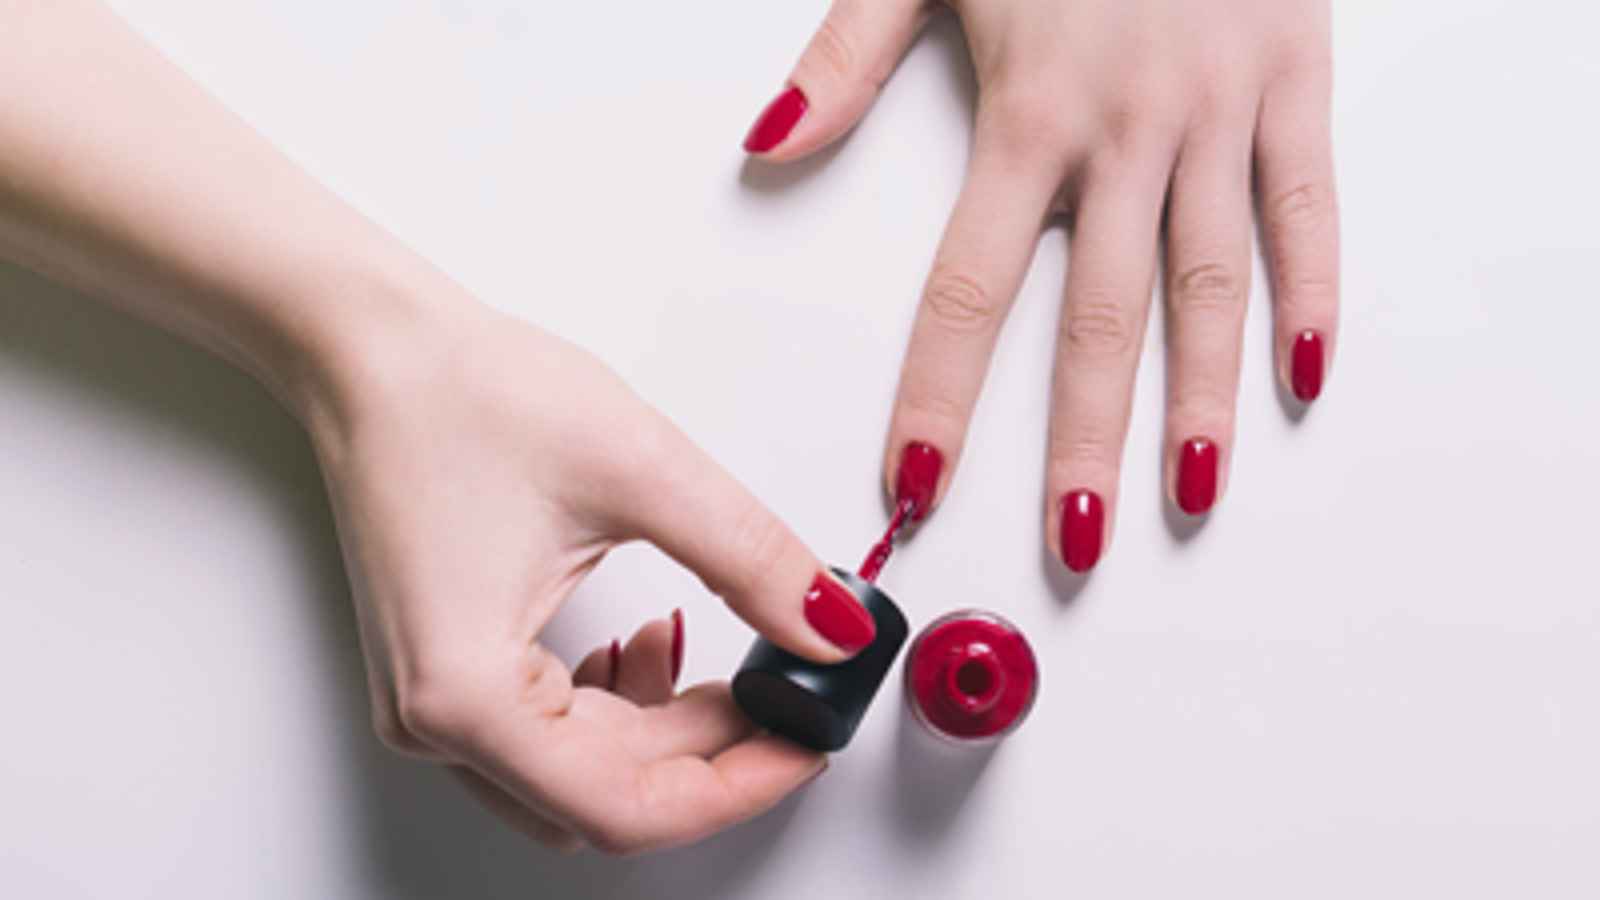 7. "Festive August Nail Colors for National Nail Polish Day" - wide 3